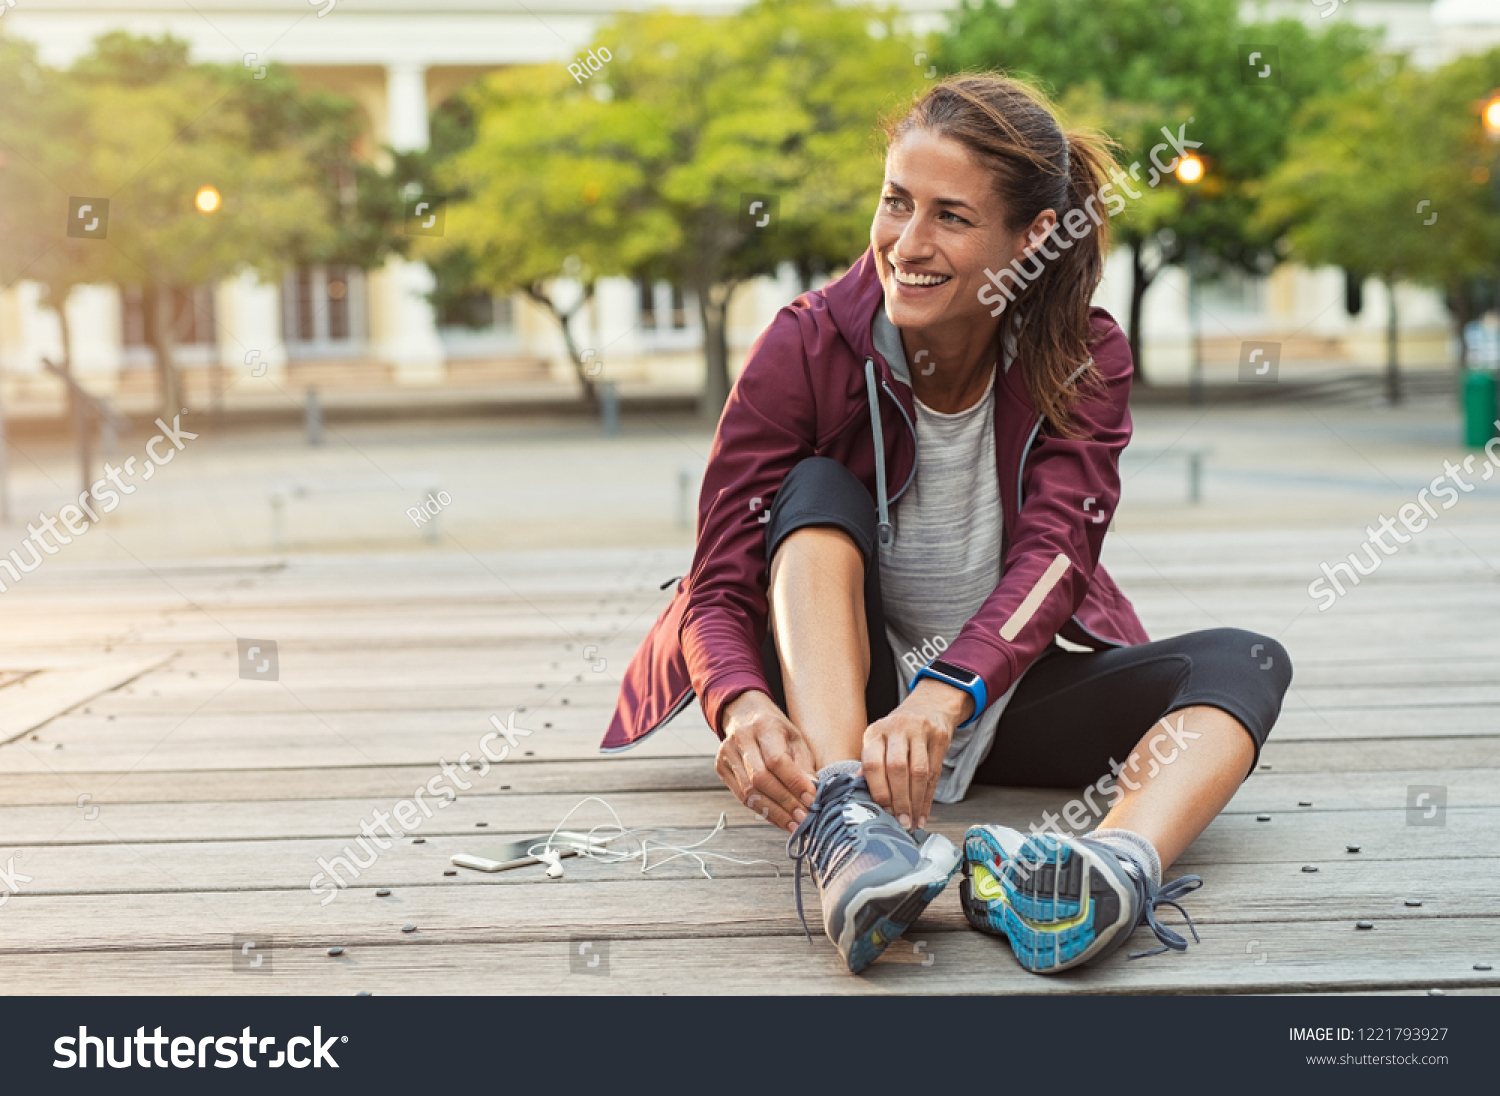 Mature fitness woman tie shoelaces on road. Cheerful runner sitting on floor on city streets with mobile and earphones wearing sport shoes. Active latin woman tying shoe lace before running. #1221793927